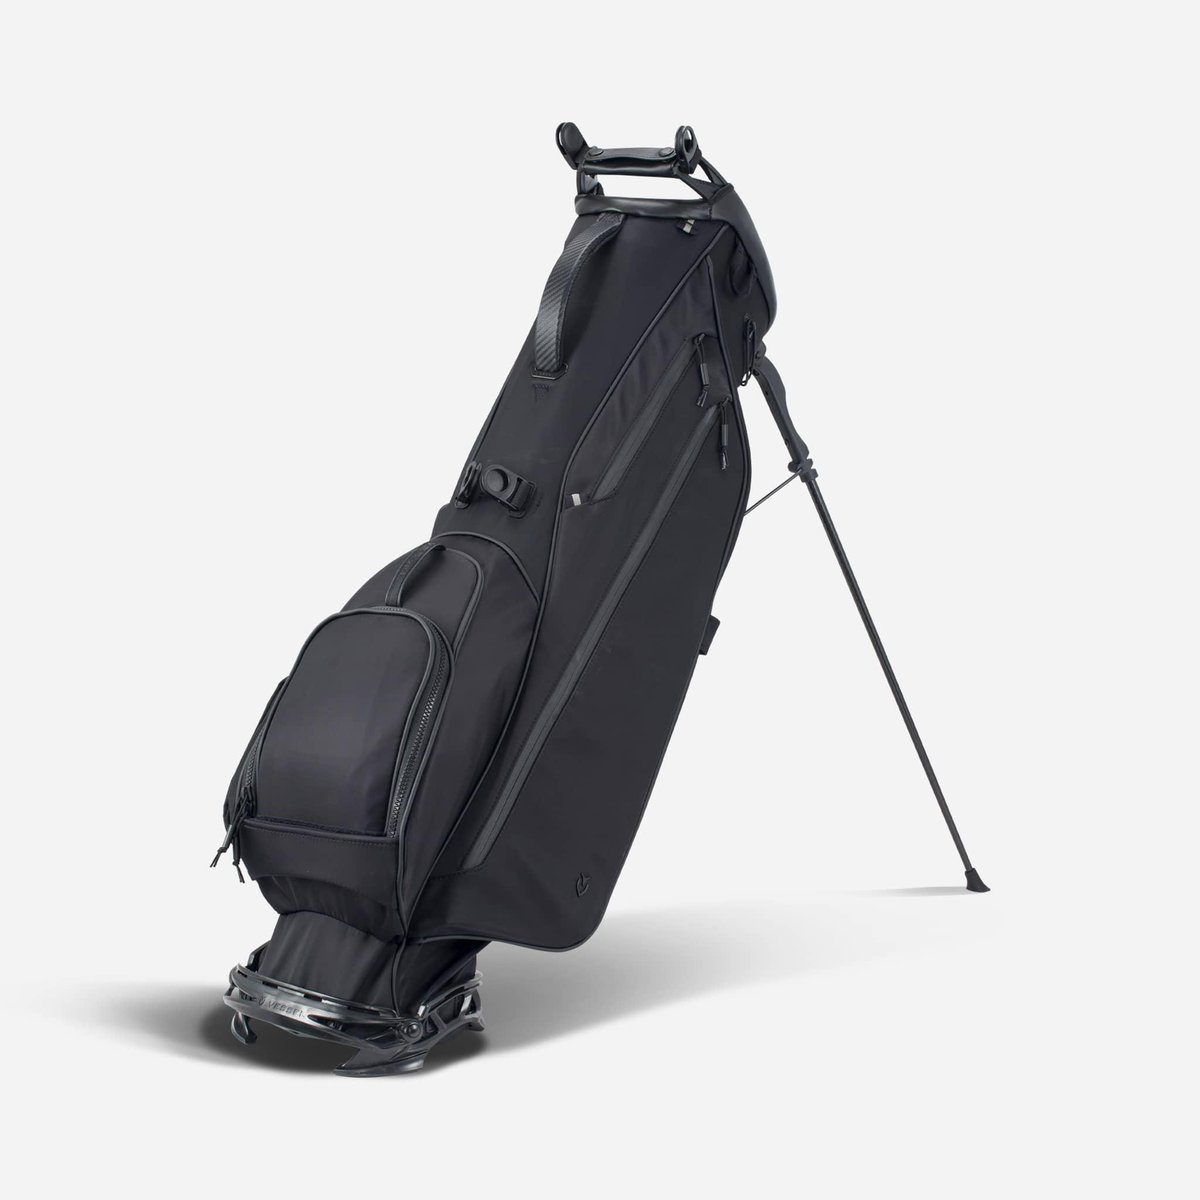 Experience lightweight comfort with the VLS Stand. Crafted from heavy-backed nylon twill & specialized features, such as an exoskeletal base, the VLS was designed to reduce the weight of your load for an effortless carry.

#VesselGolf #CraftedForTheDriven #LightGolfBag #GolfBags